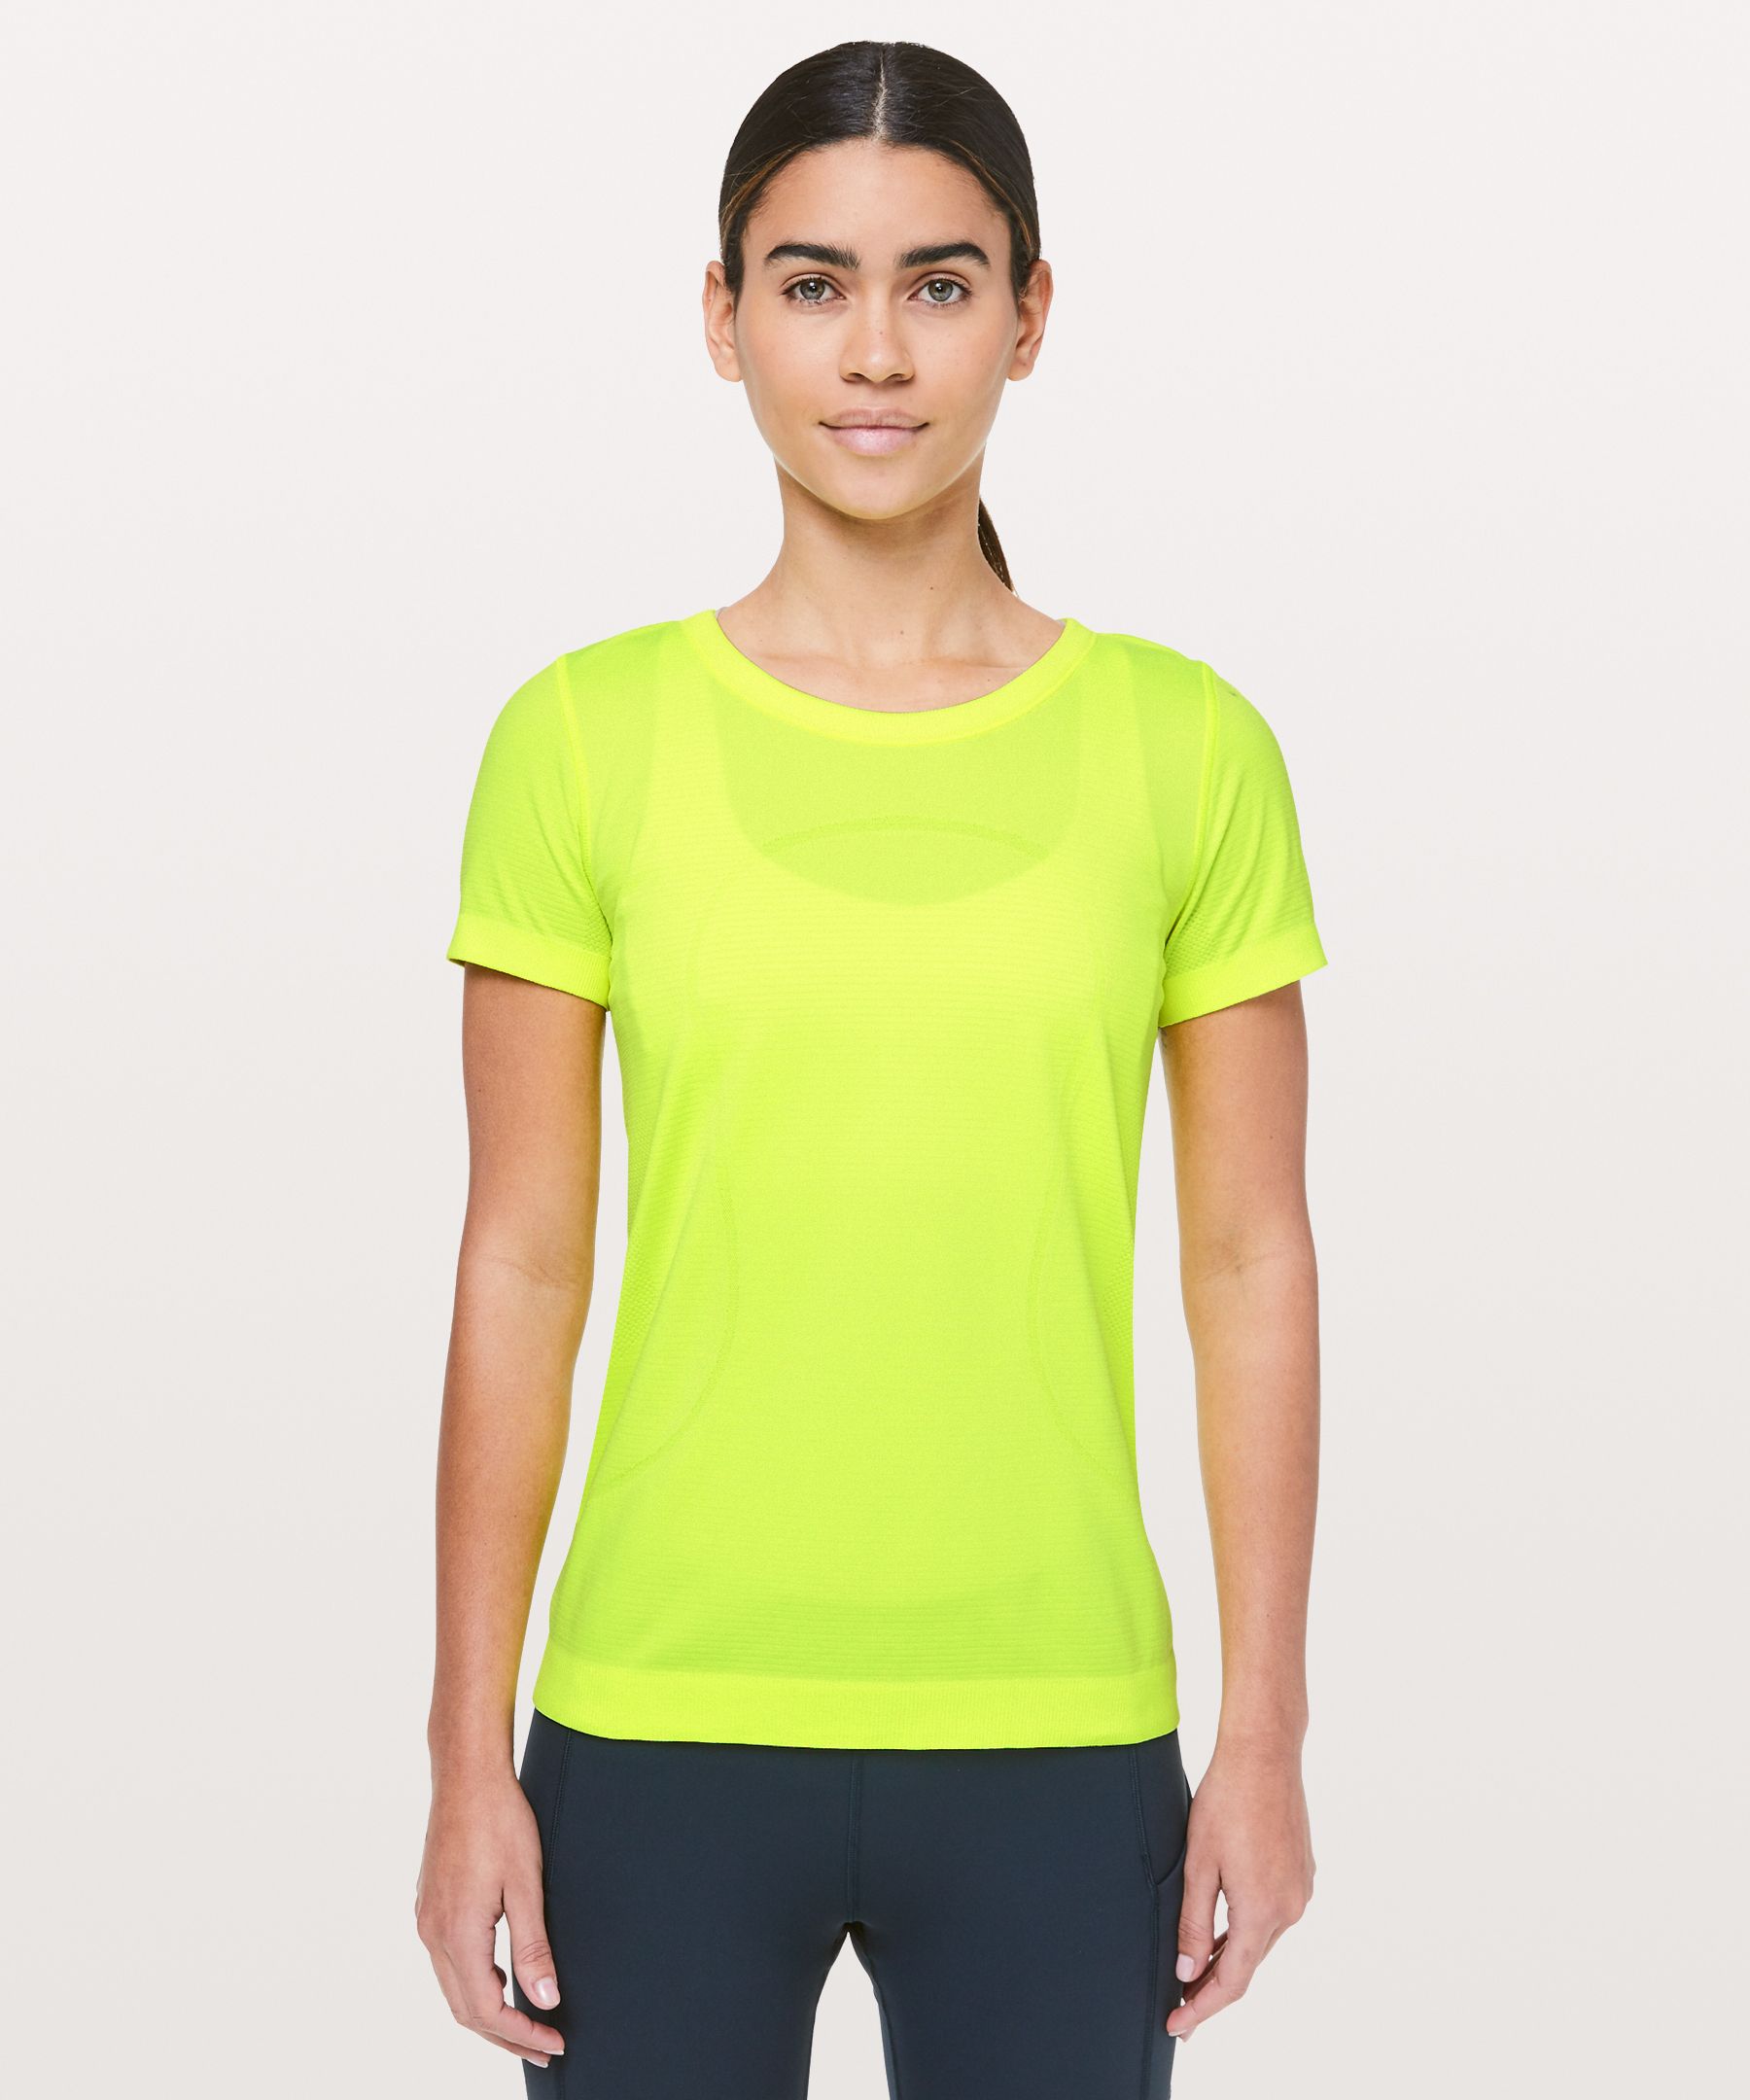 Lululemon Swiftly Relaxed Short Sleeve 2.0 In Yellow